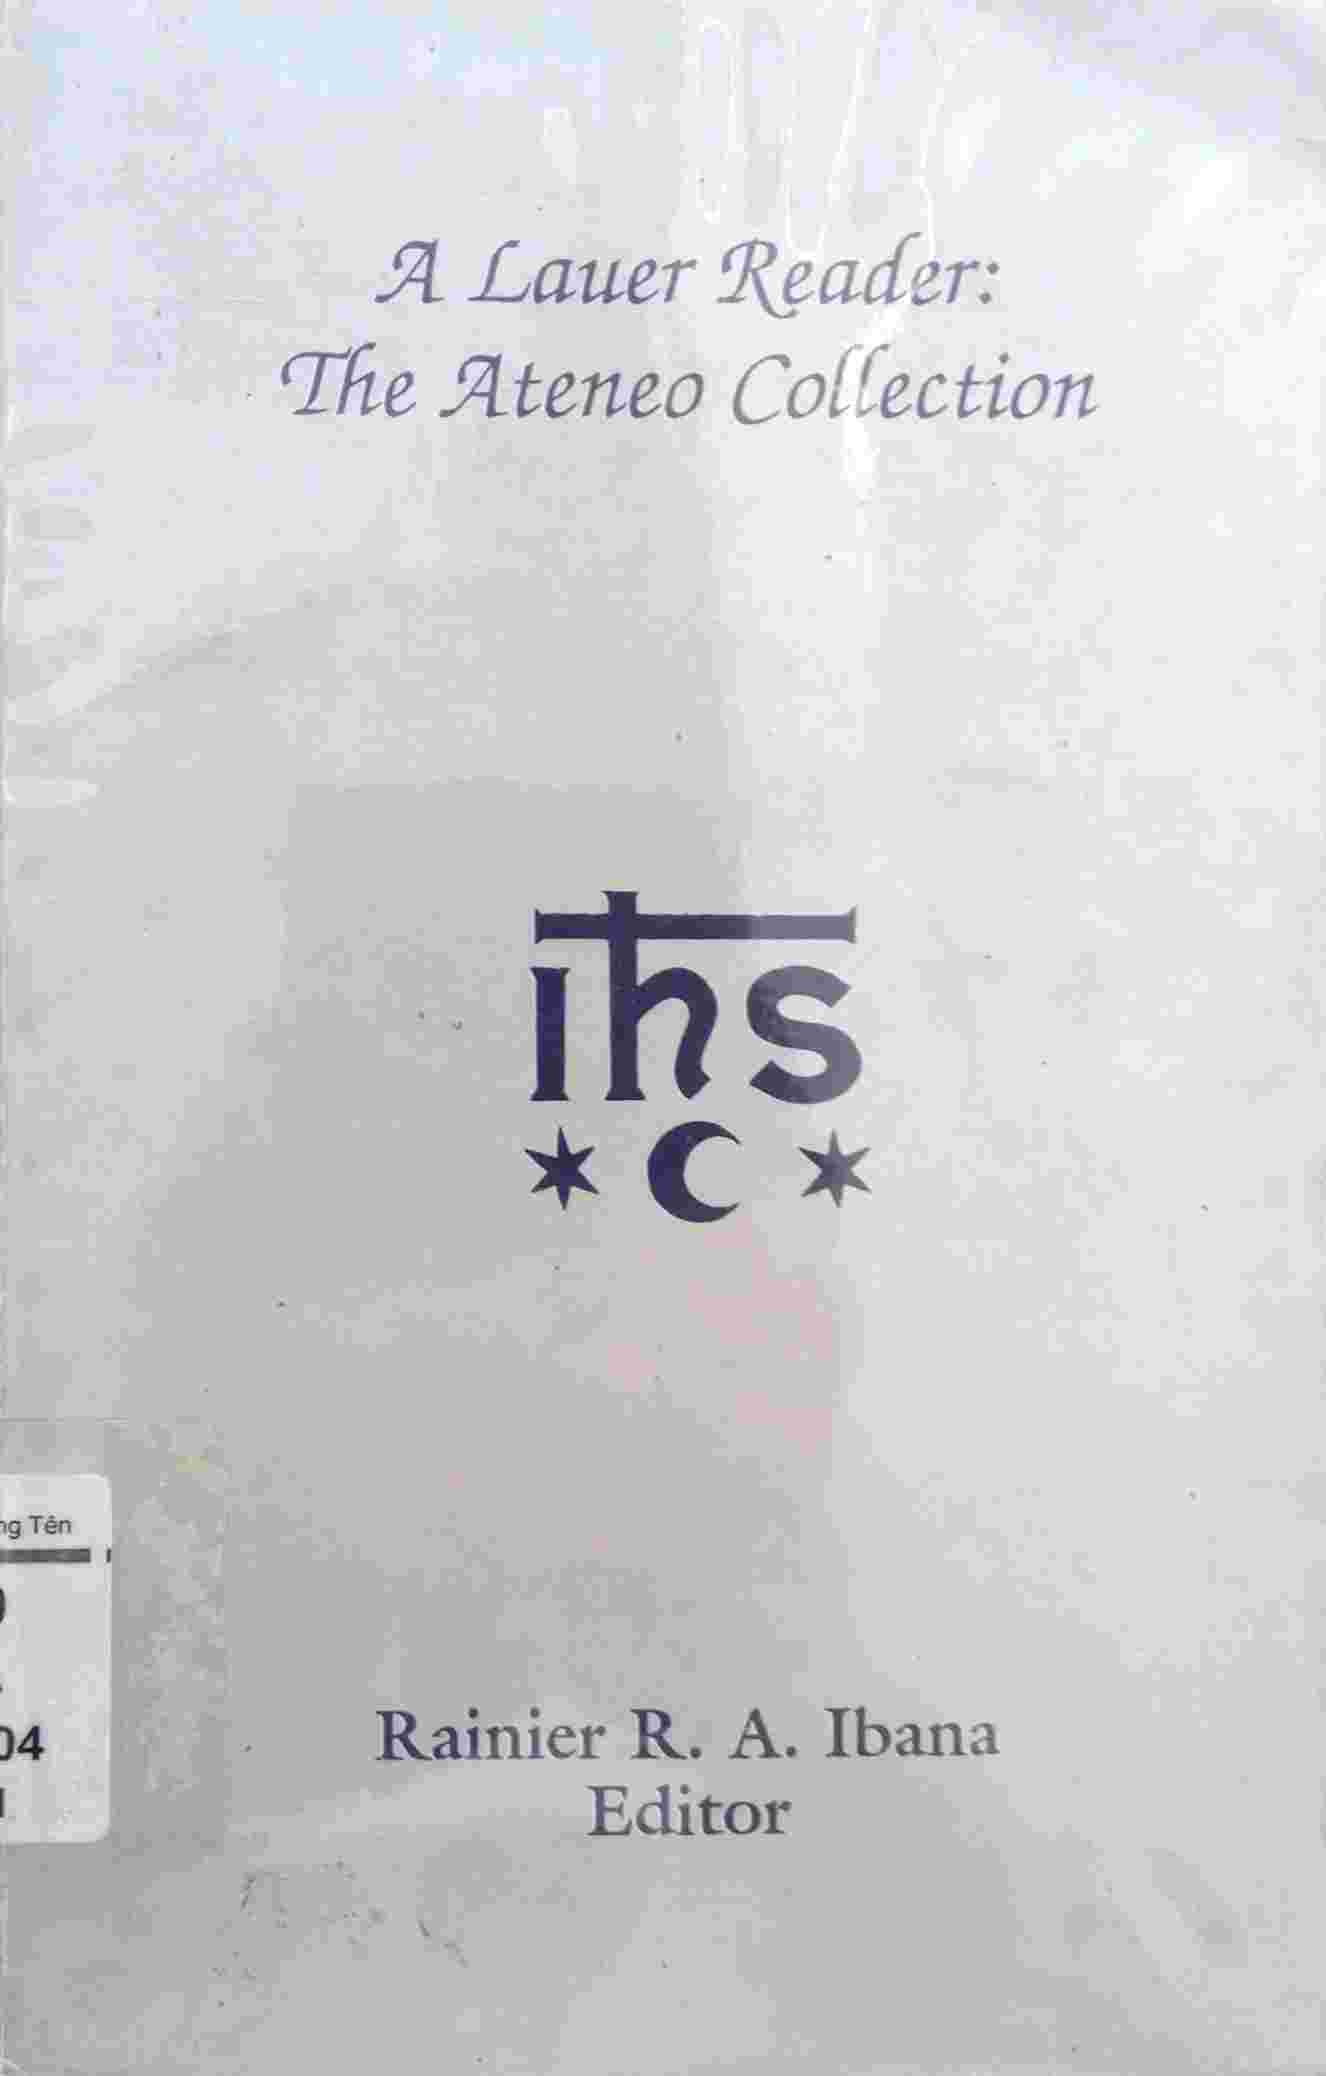 ALAUER READER: THE ATENEO COLLECTION